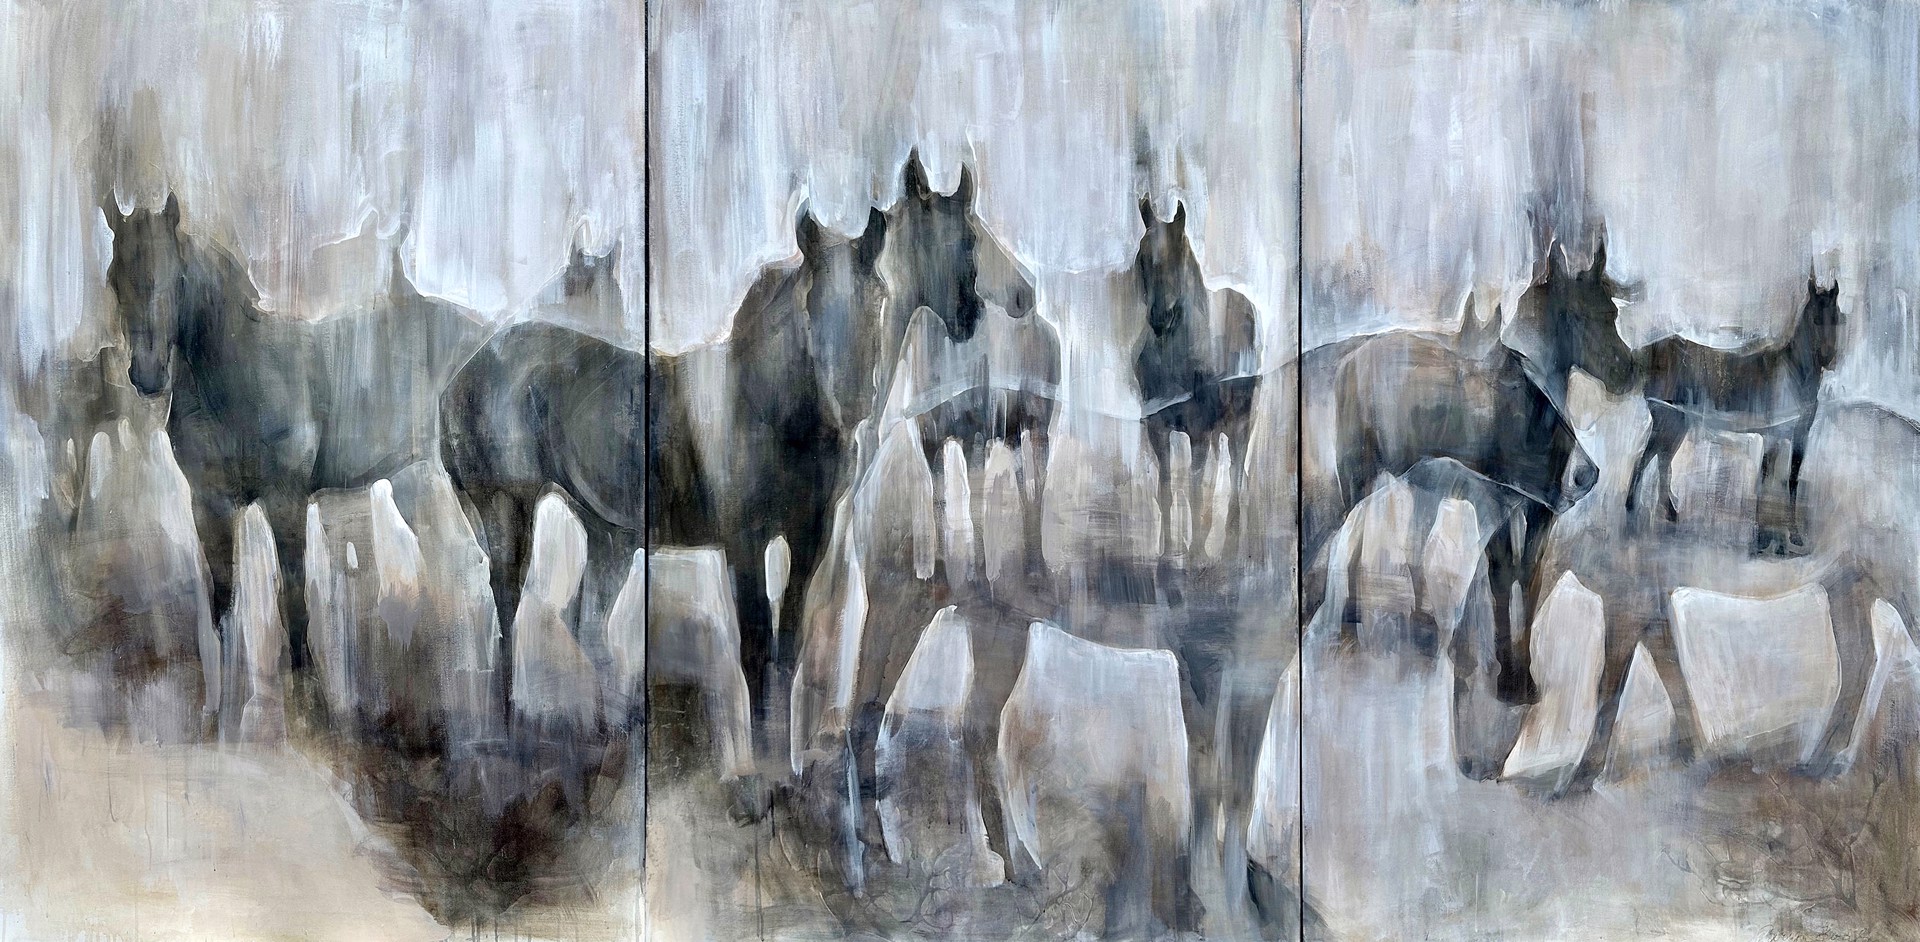 Original Mixed Media Painting By Taryn Boals Featuring Overlays Of Horse Silhouettes In Neutral Color Palette